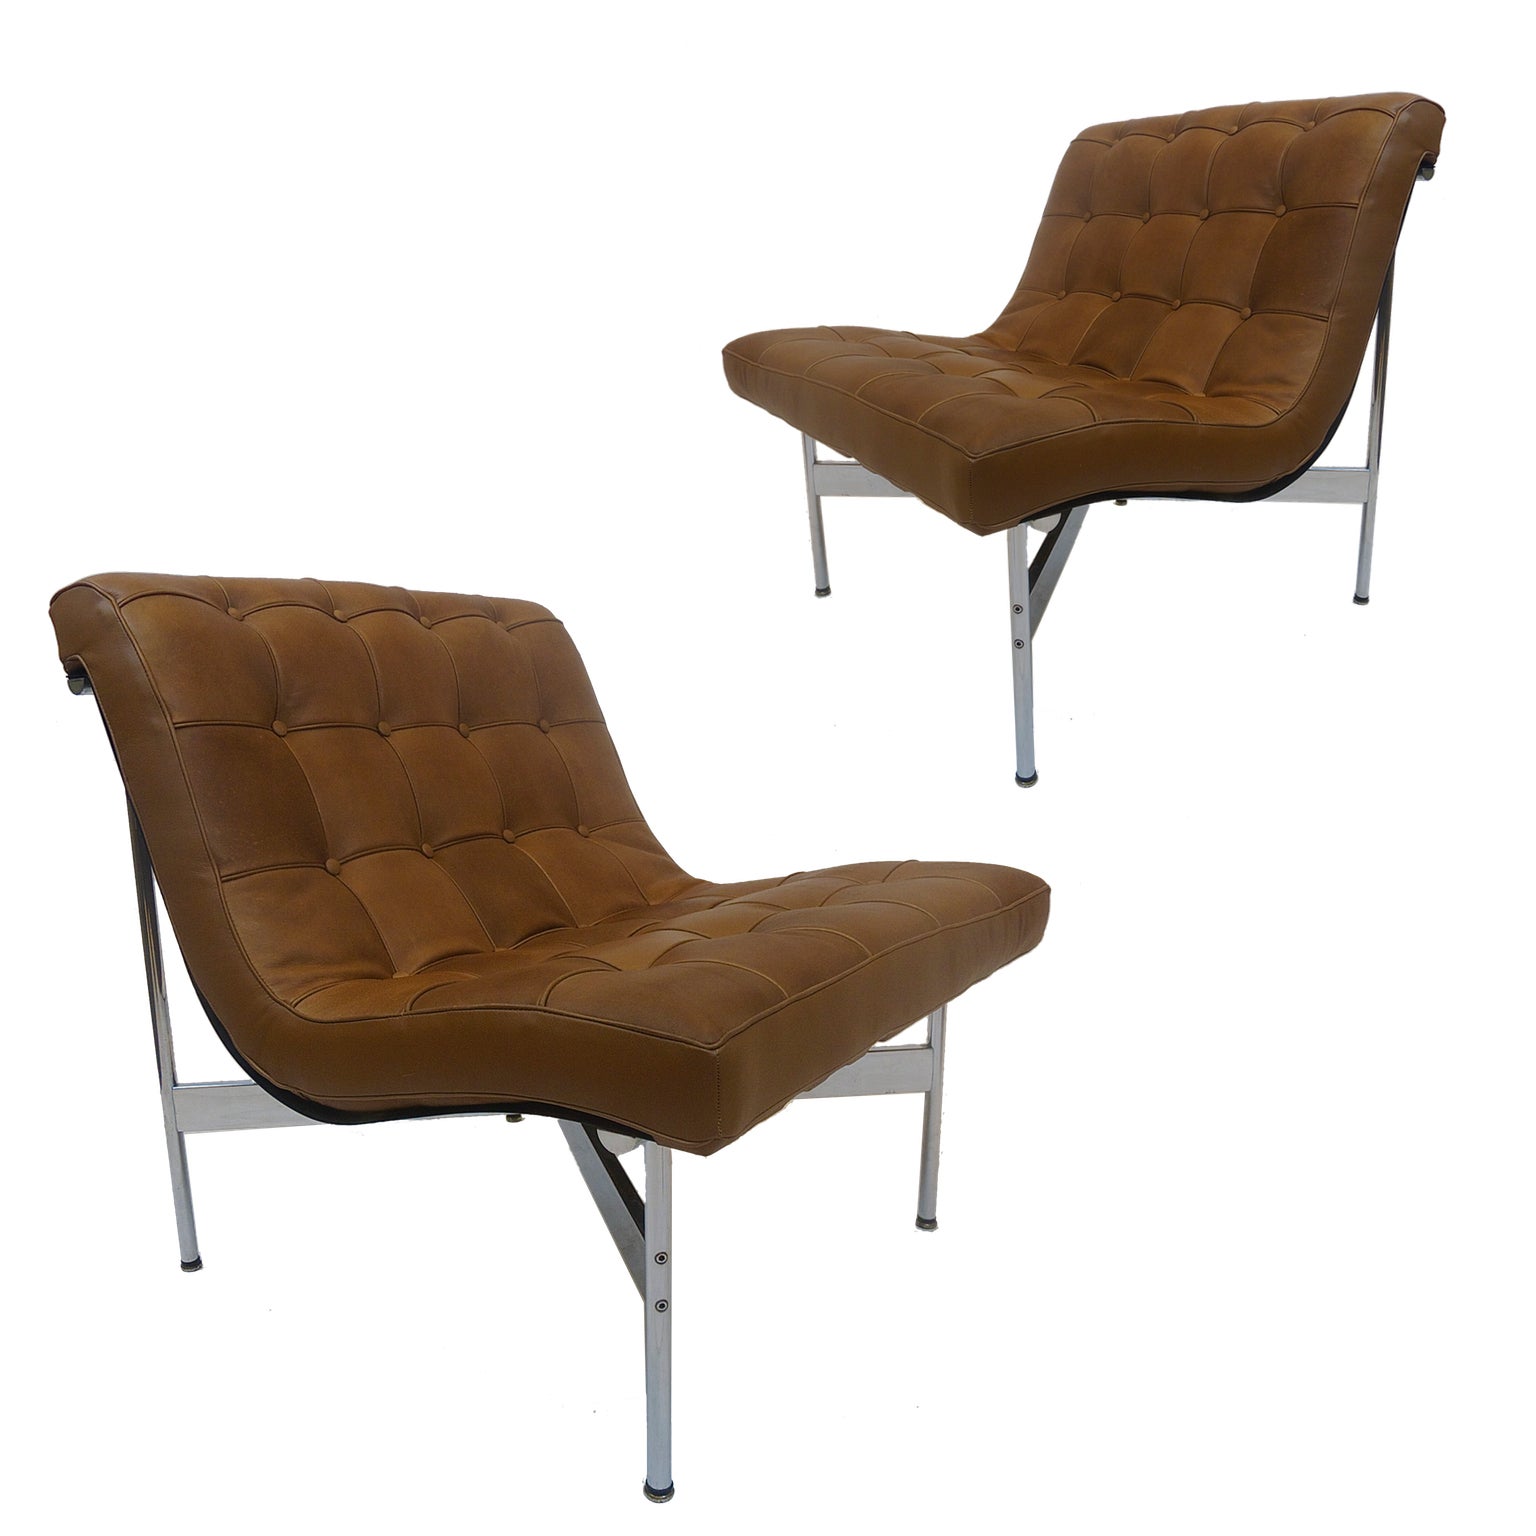 Pair of "New York" Chairs by Katavolos, Littell and Kelley for Laverne Intl